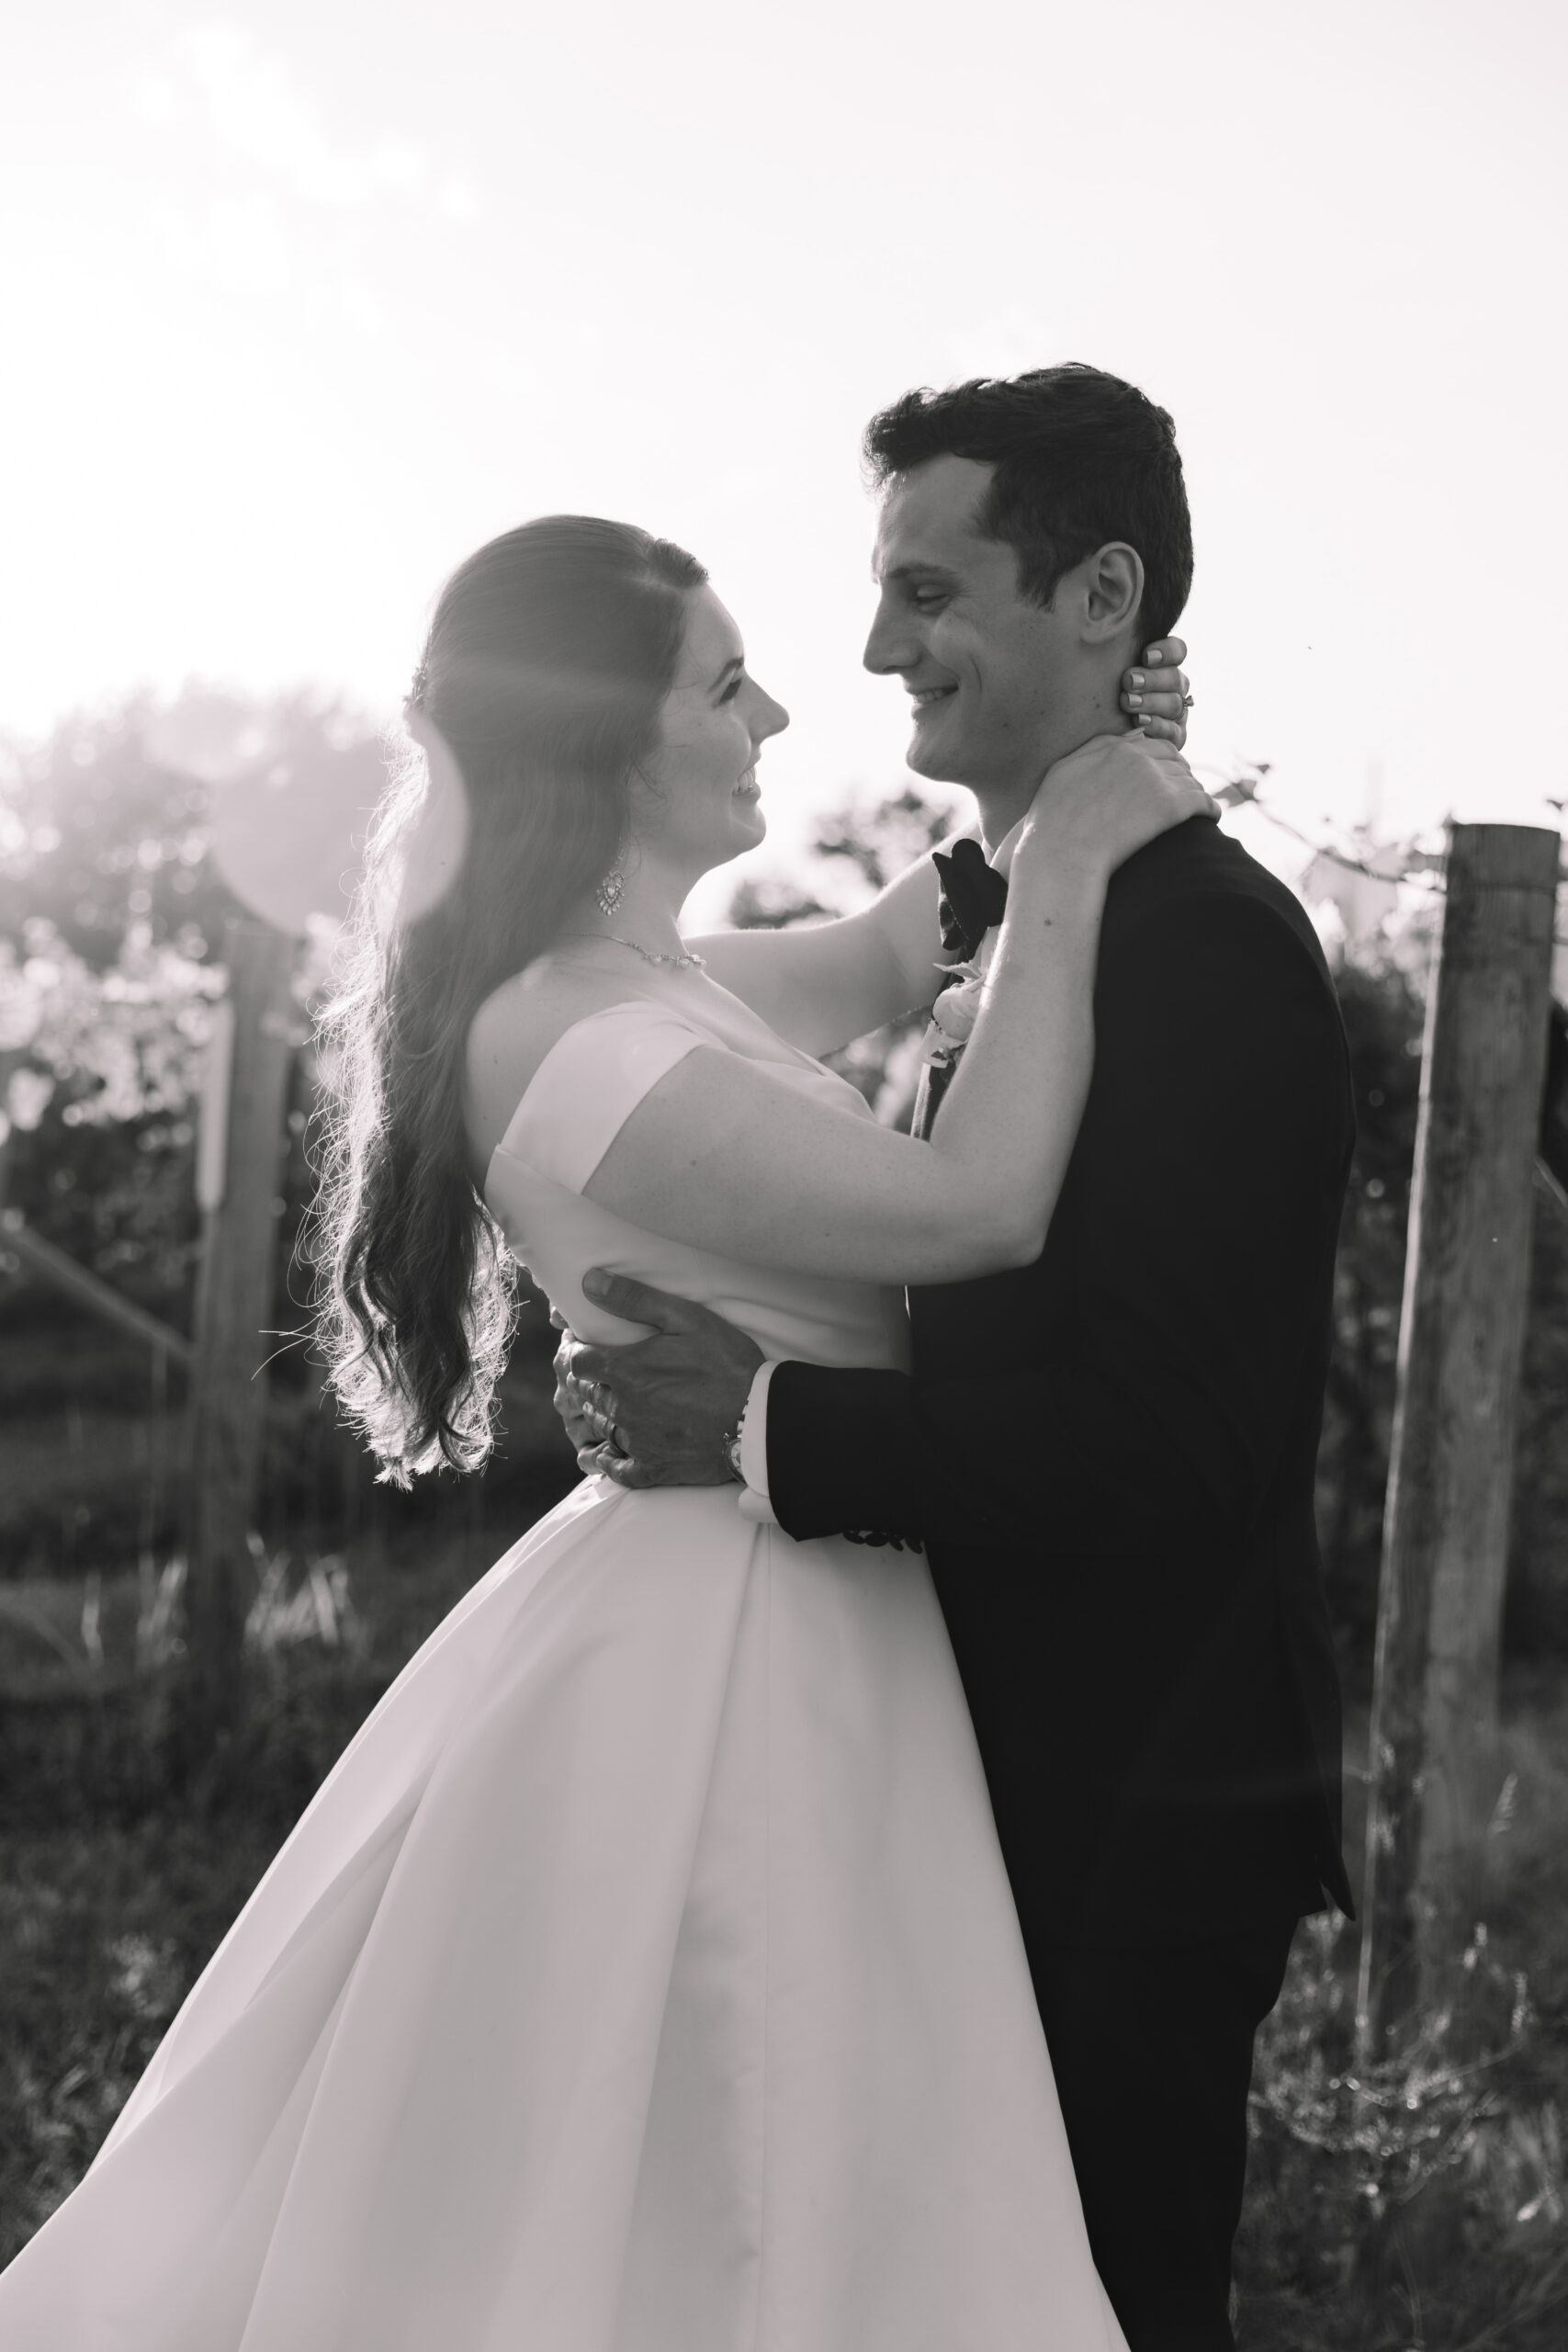 A black and white photo of a bride and groom lovingly embracing in a vineyard at sunset, with soft sunlight filtering through in the background at a wedding in Minnesota